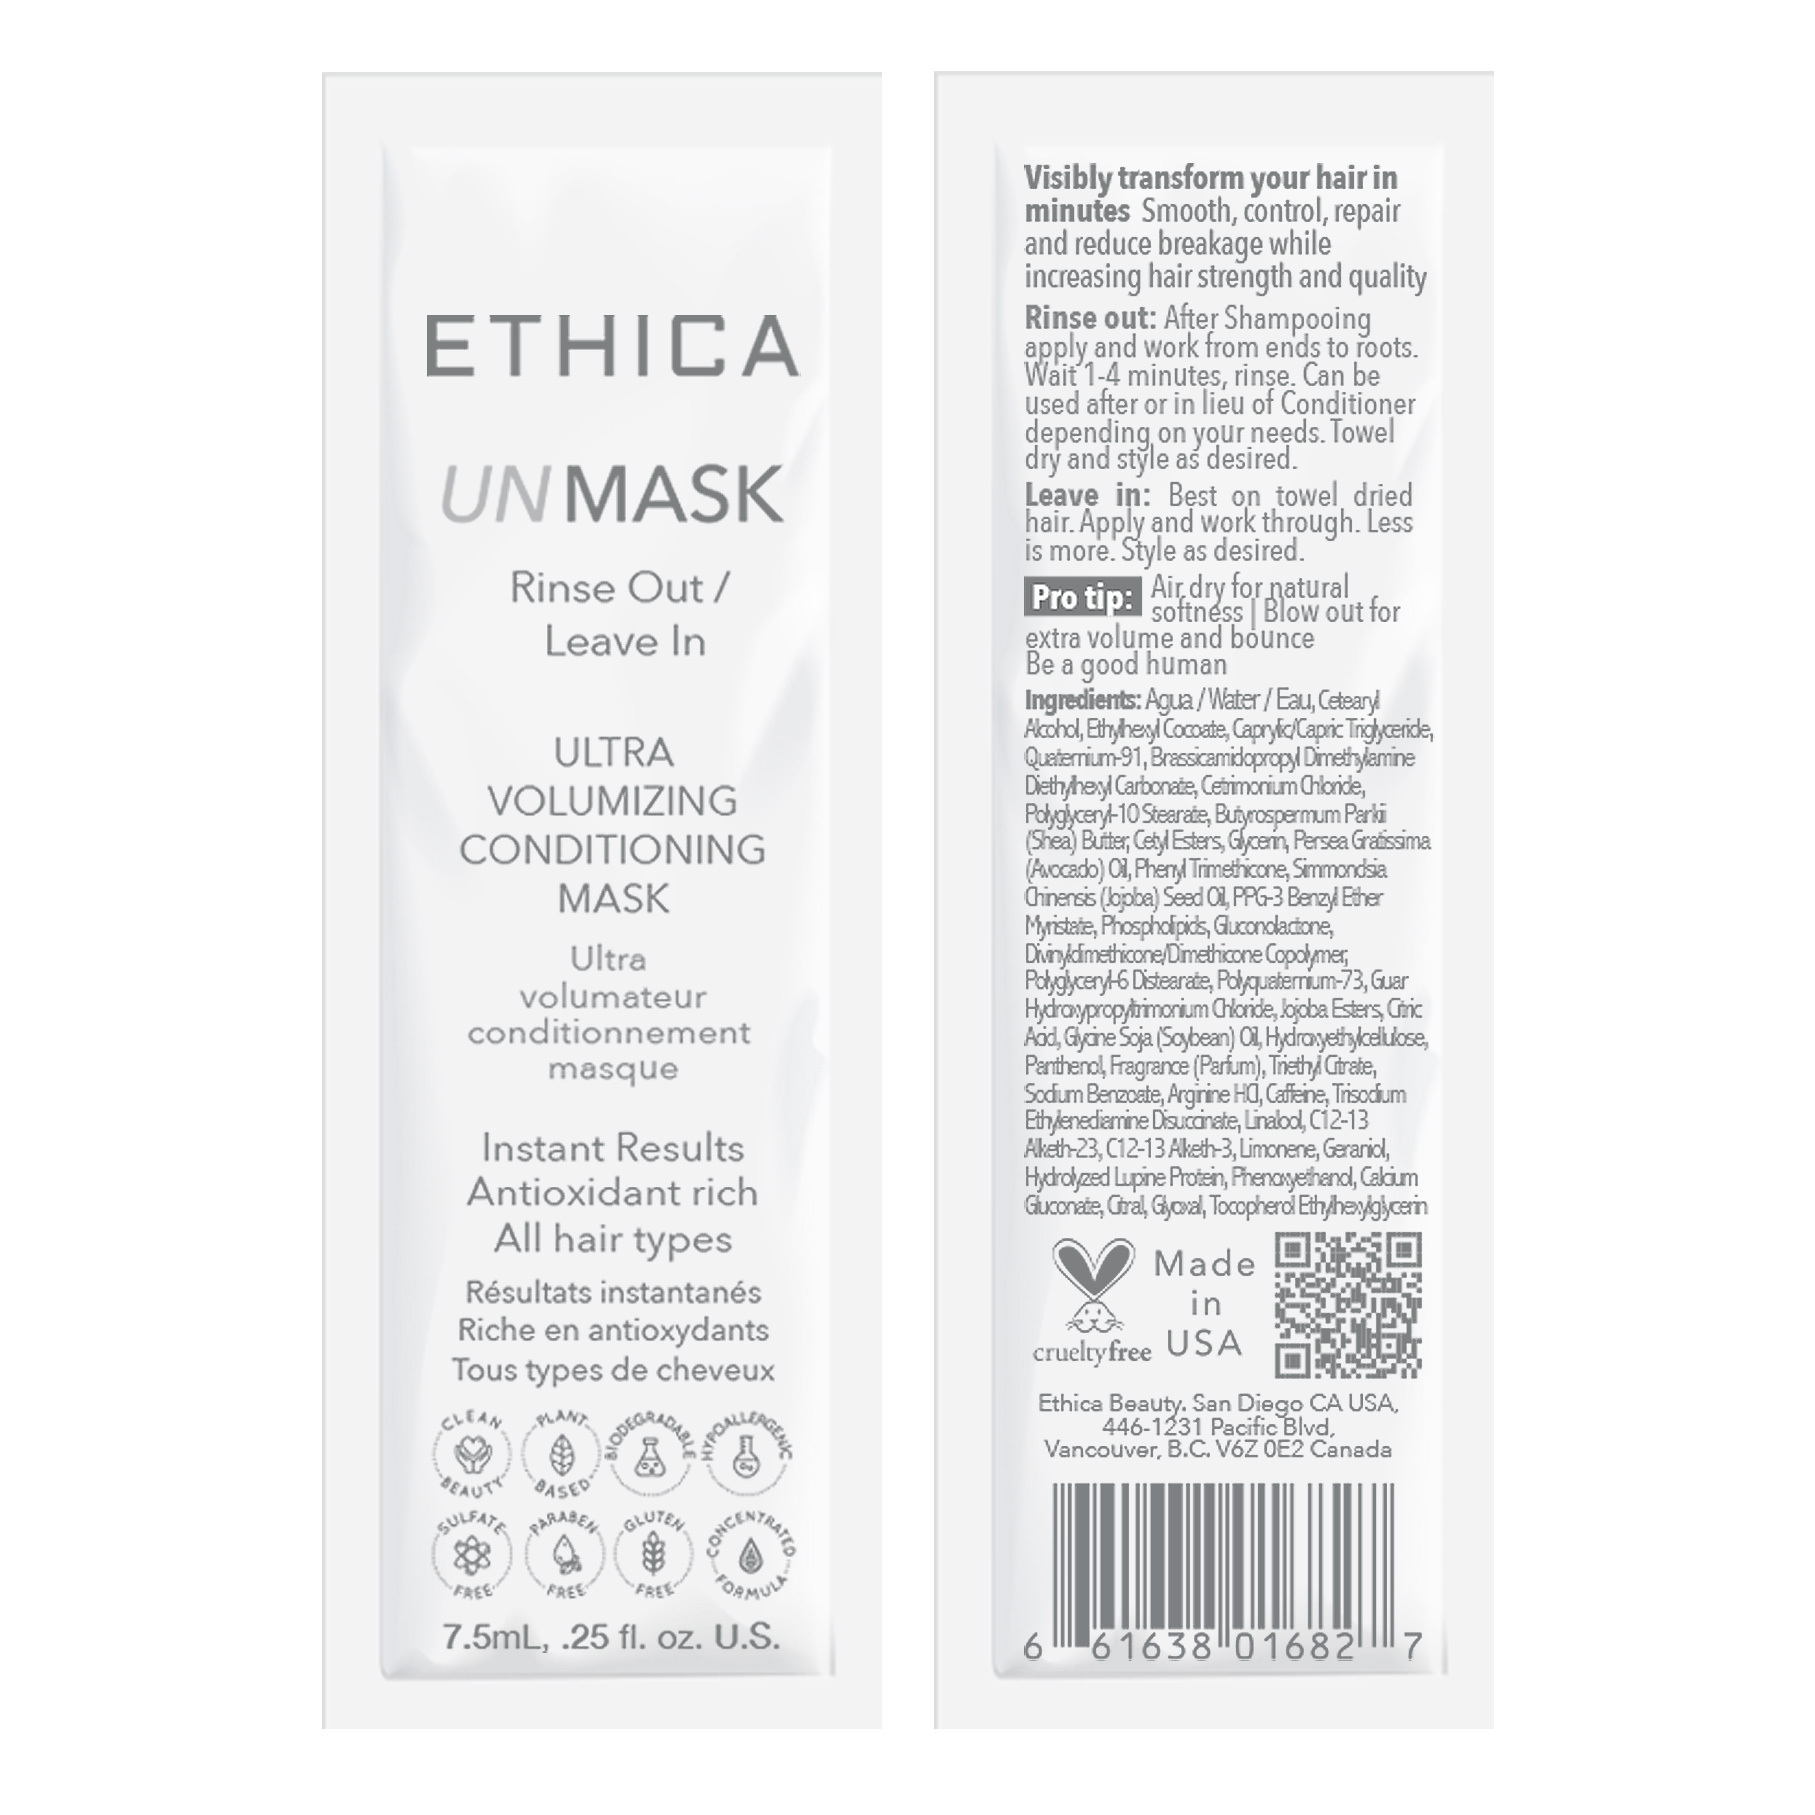 Ethica UNMASK Ultra Conditioning Mask